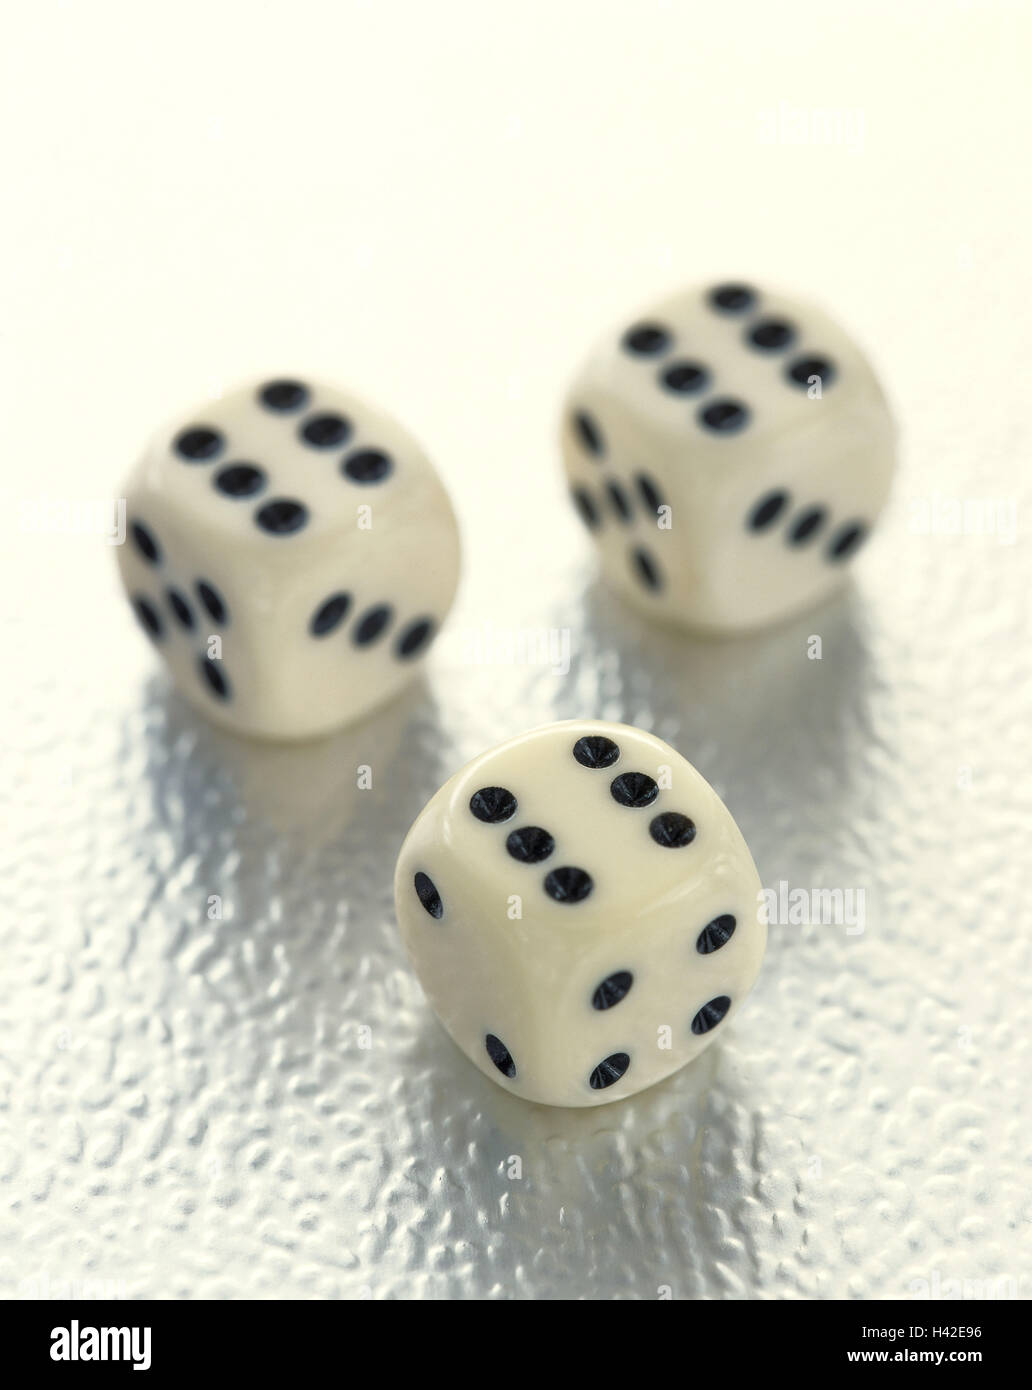 Cubes, luck, Sechsen, game chance, game, craps, throw dice, success, victory, profit, chance, leisure time, entertainment, parlour game, game cube, three, toss, number immediately, Sechserpasch, product photography, Still life Stock Photo